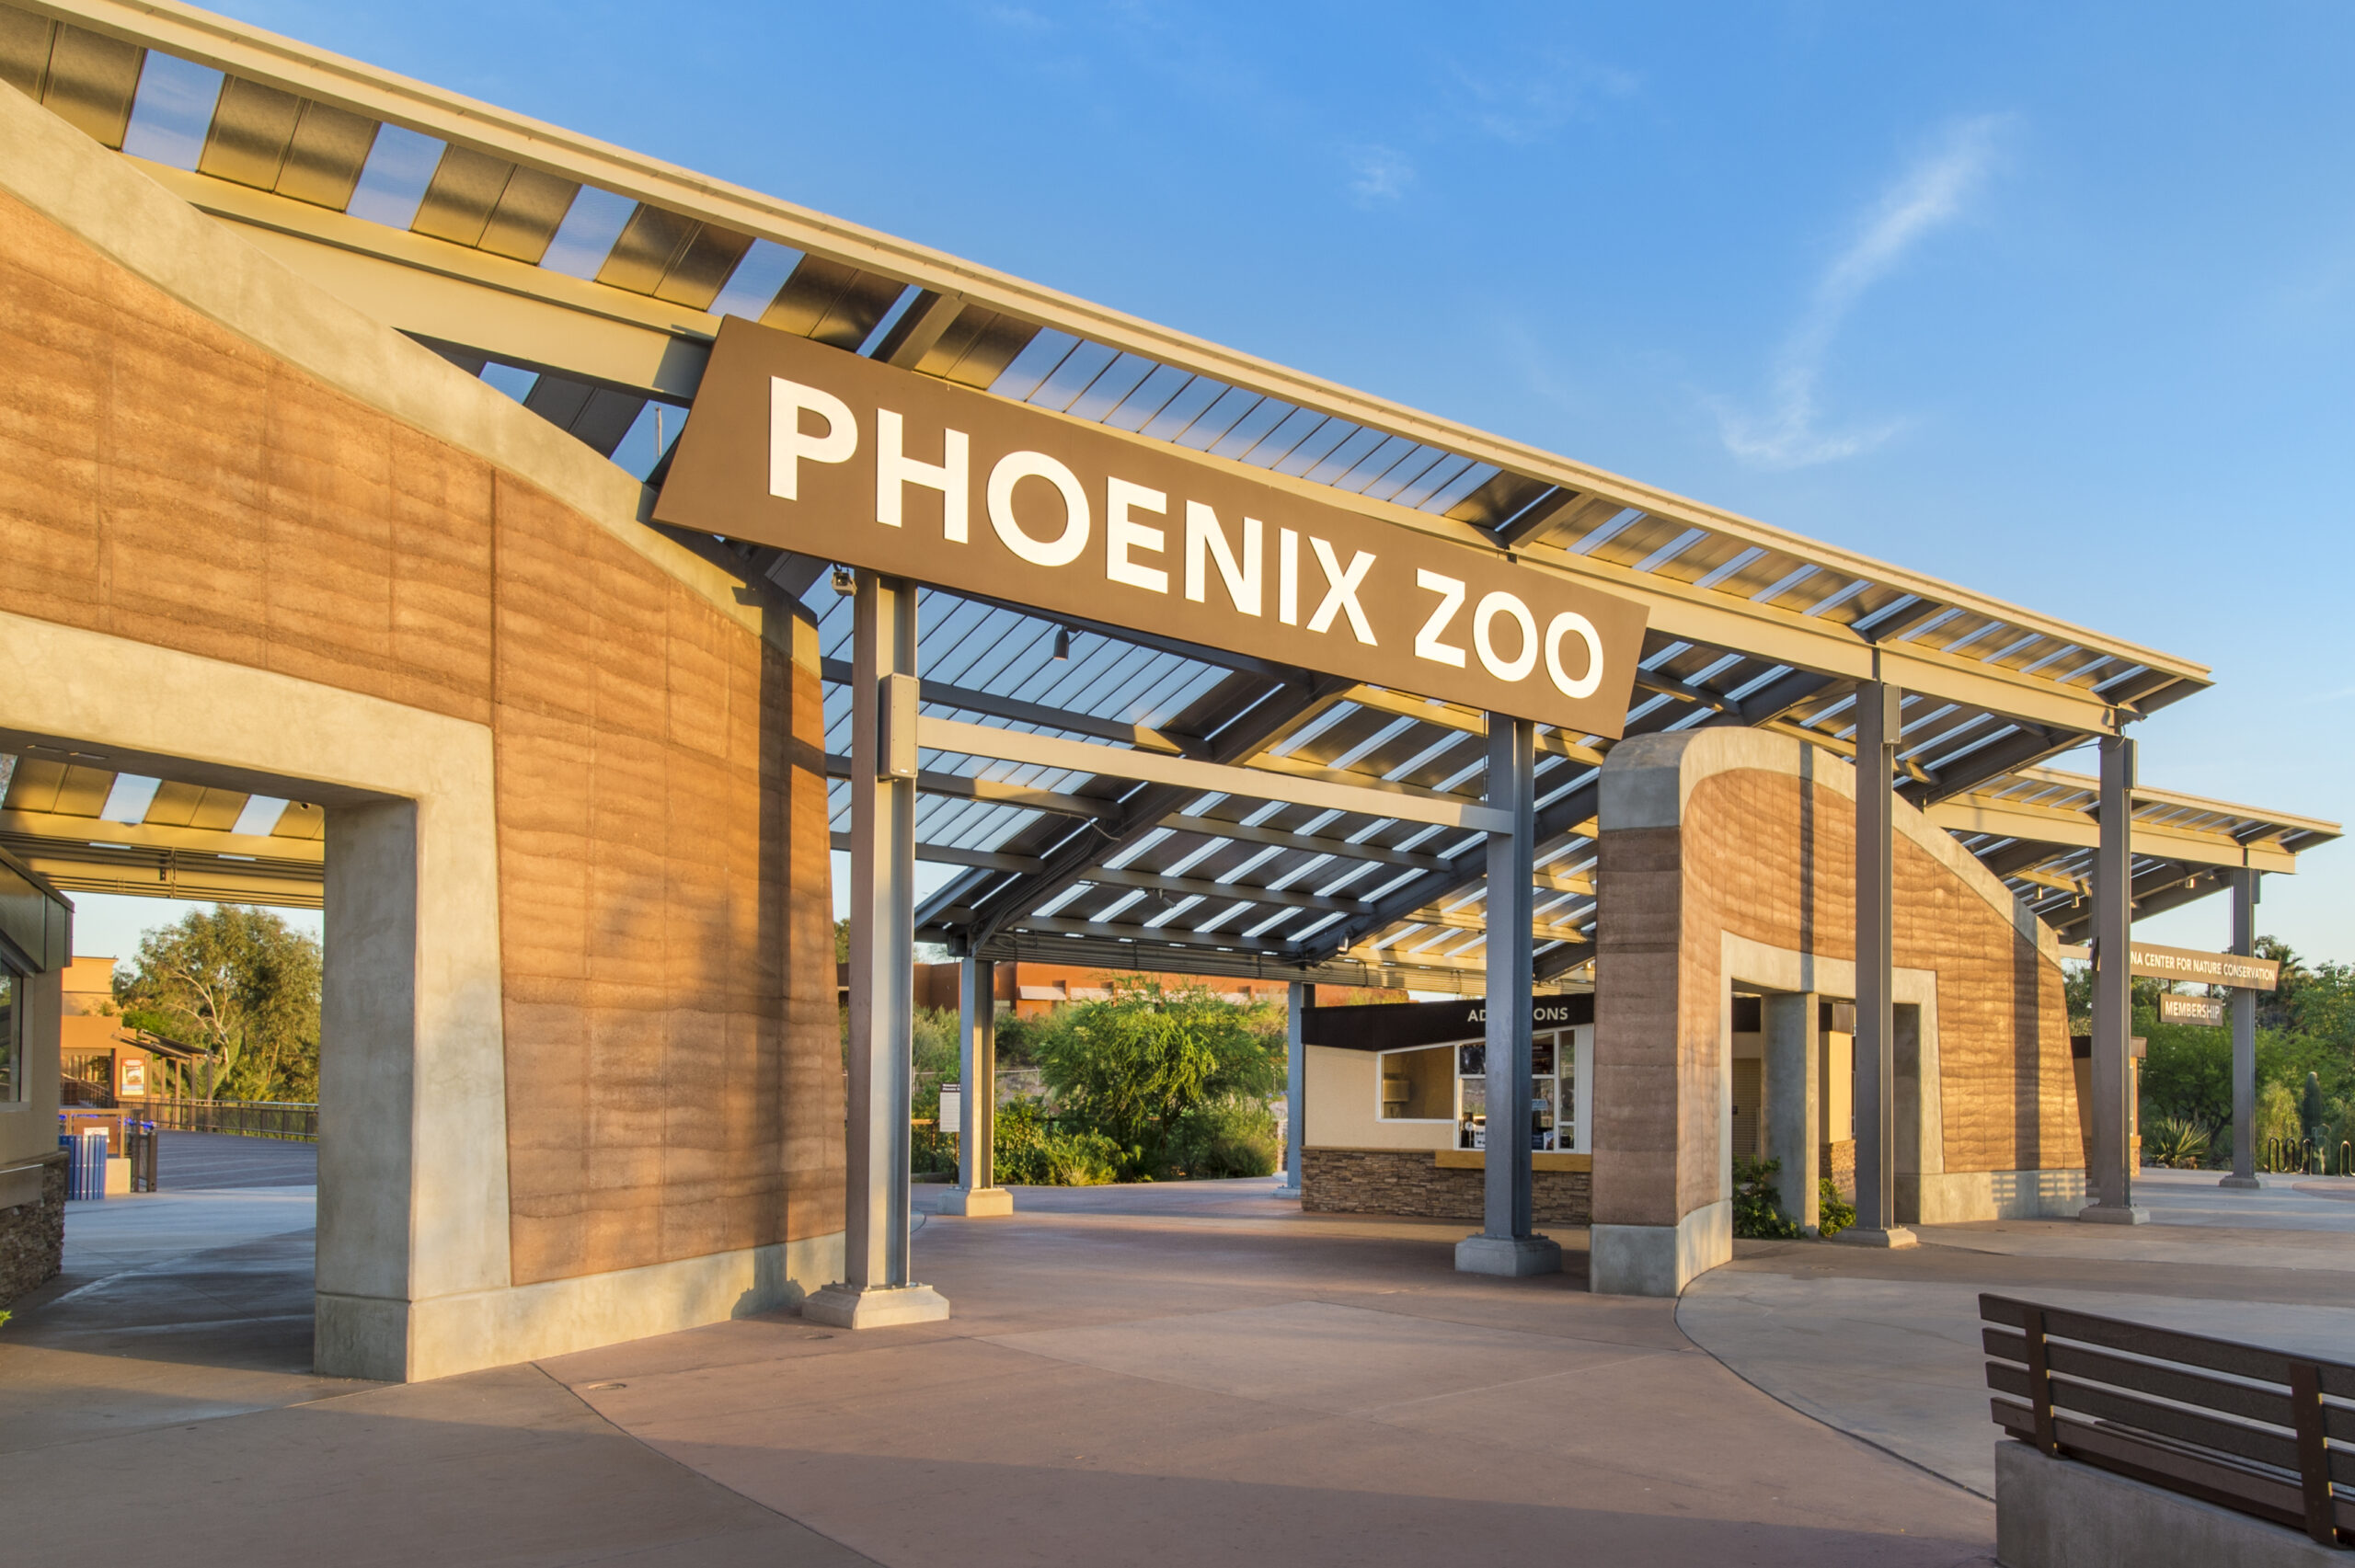 Phoenix Zoo has partnered with GoodNight Stay